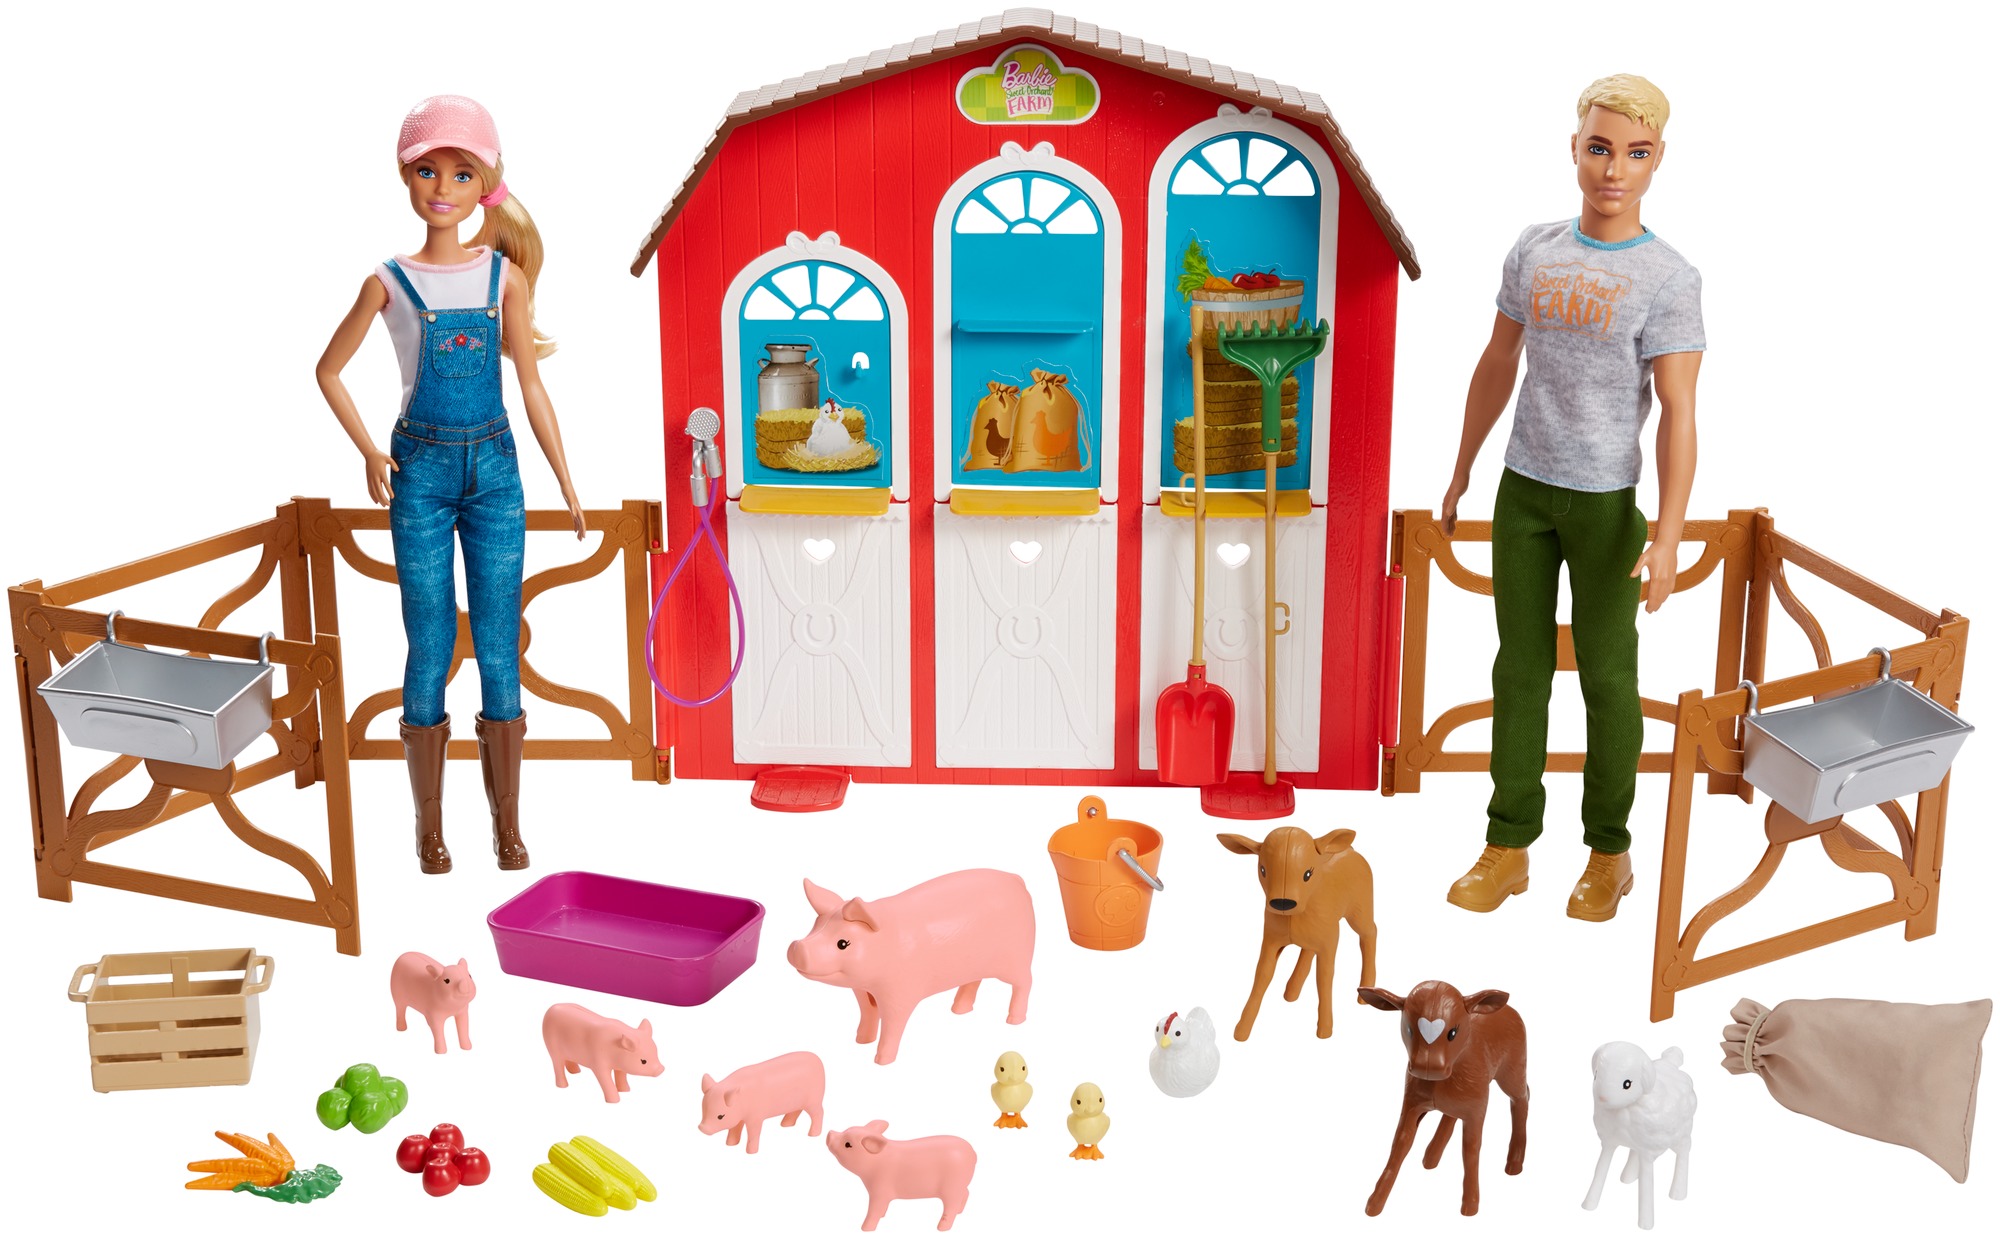 Barbie Sweet Orchard Farm Barn Playset With Barbie And Ken Dolls, Barn With Fence And 11 Animals - image 1 of 7